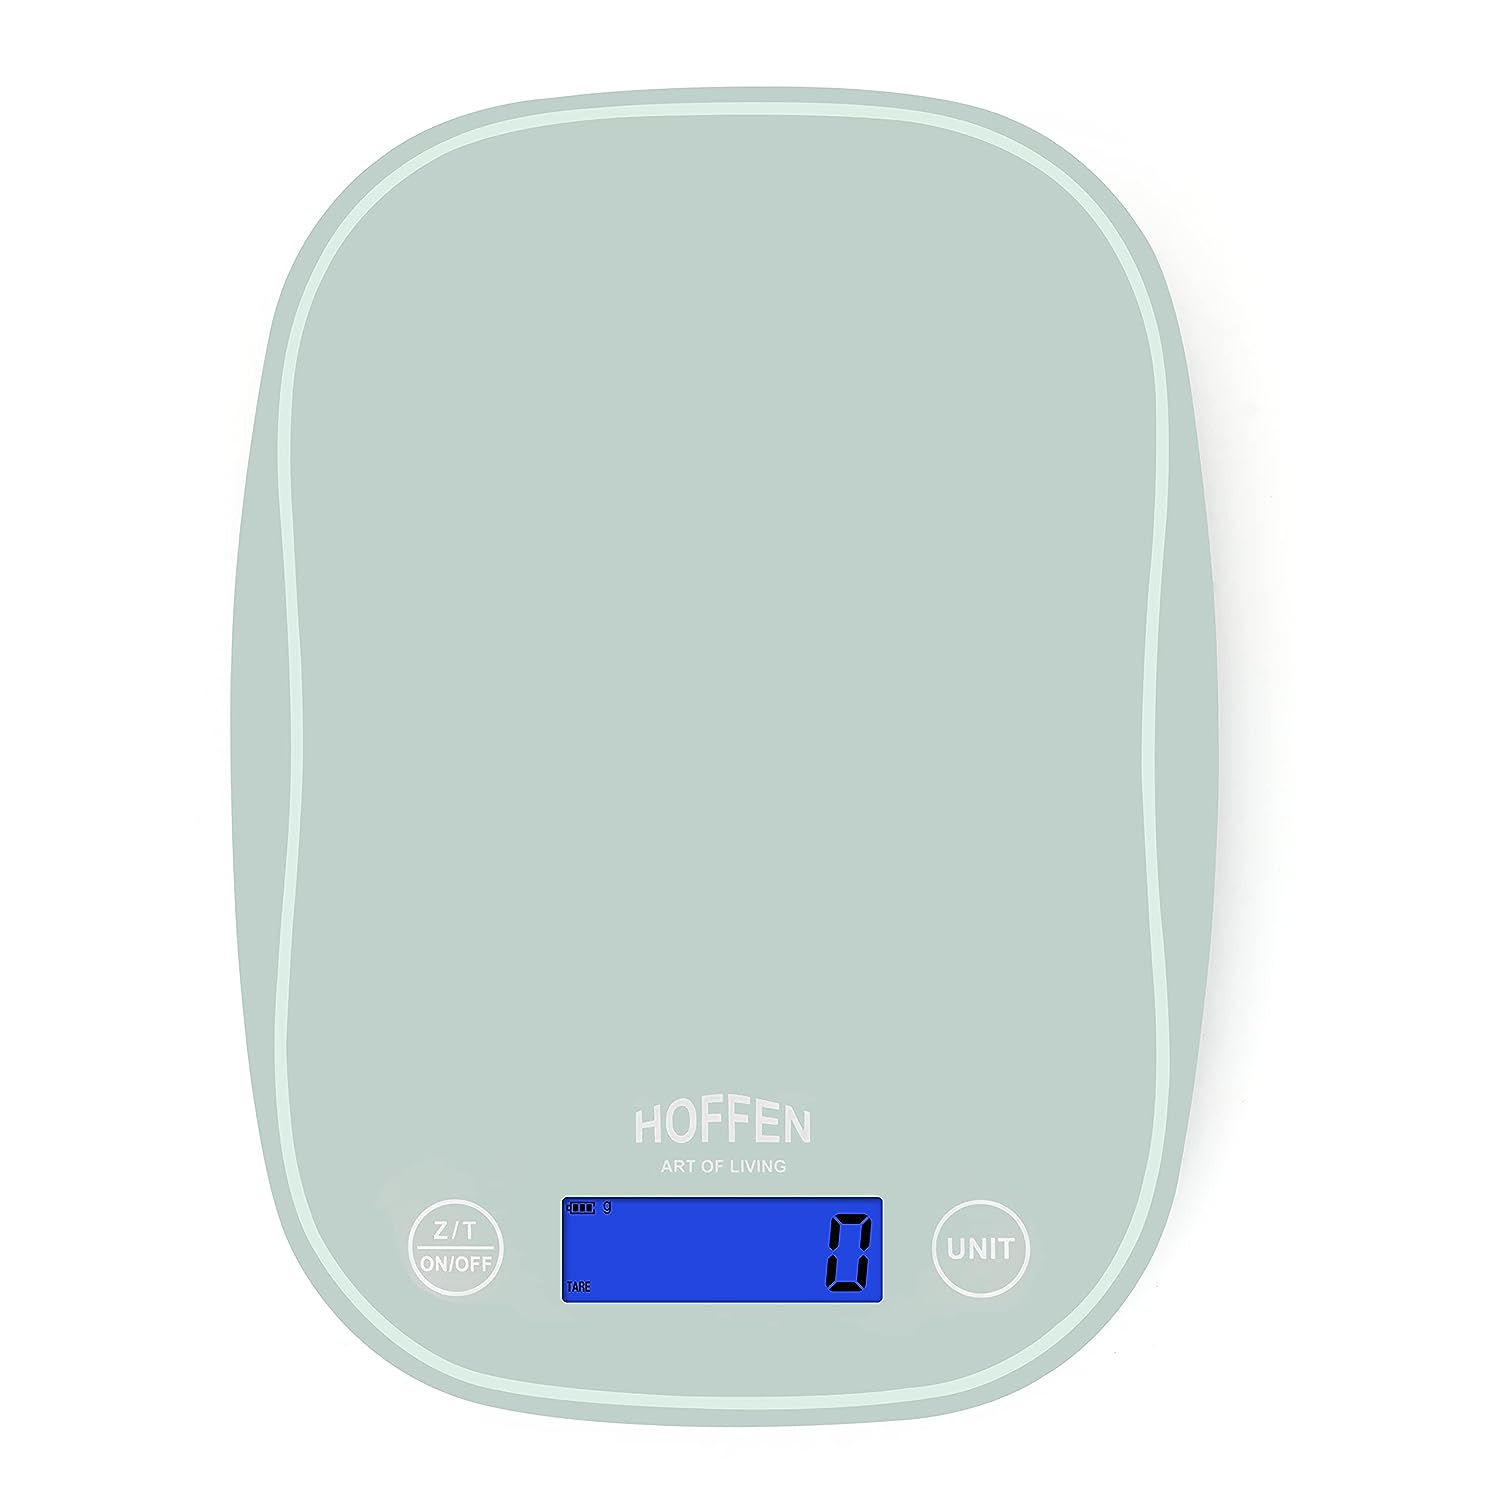 Hoffen 5 kg Electronic Digital Weighing Scale, Food Weight Machine for Kitchen,Home, Baking and Health Battries are also Included